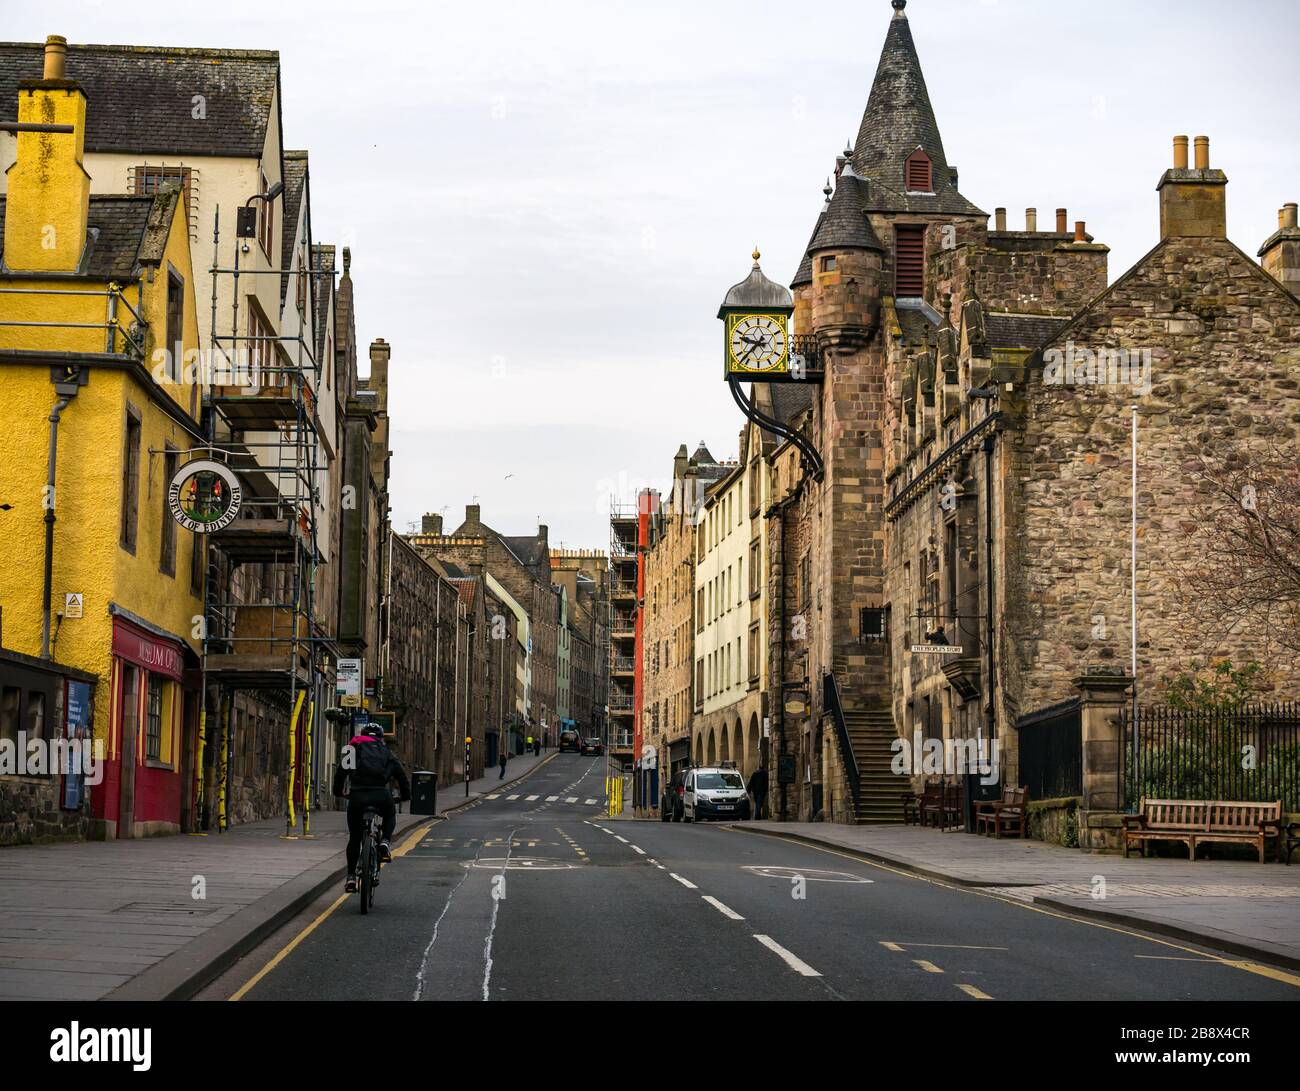 Edinburgh, Scotland, United Kingdom. 23rd March, 2020. Empty streets during the Covid-19 Coronavirus pandemic in the capital city as the message to stay at home heed the social distancing measures appears to have had an effect despite the lovely Spring sunshine. The Royal Mile at Canongate is deserted Stock Photo